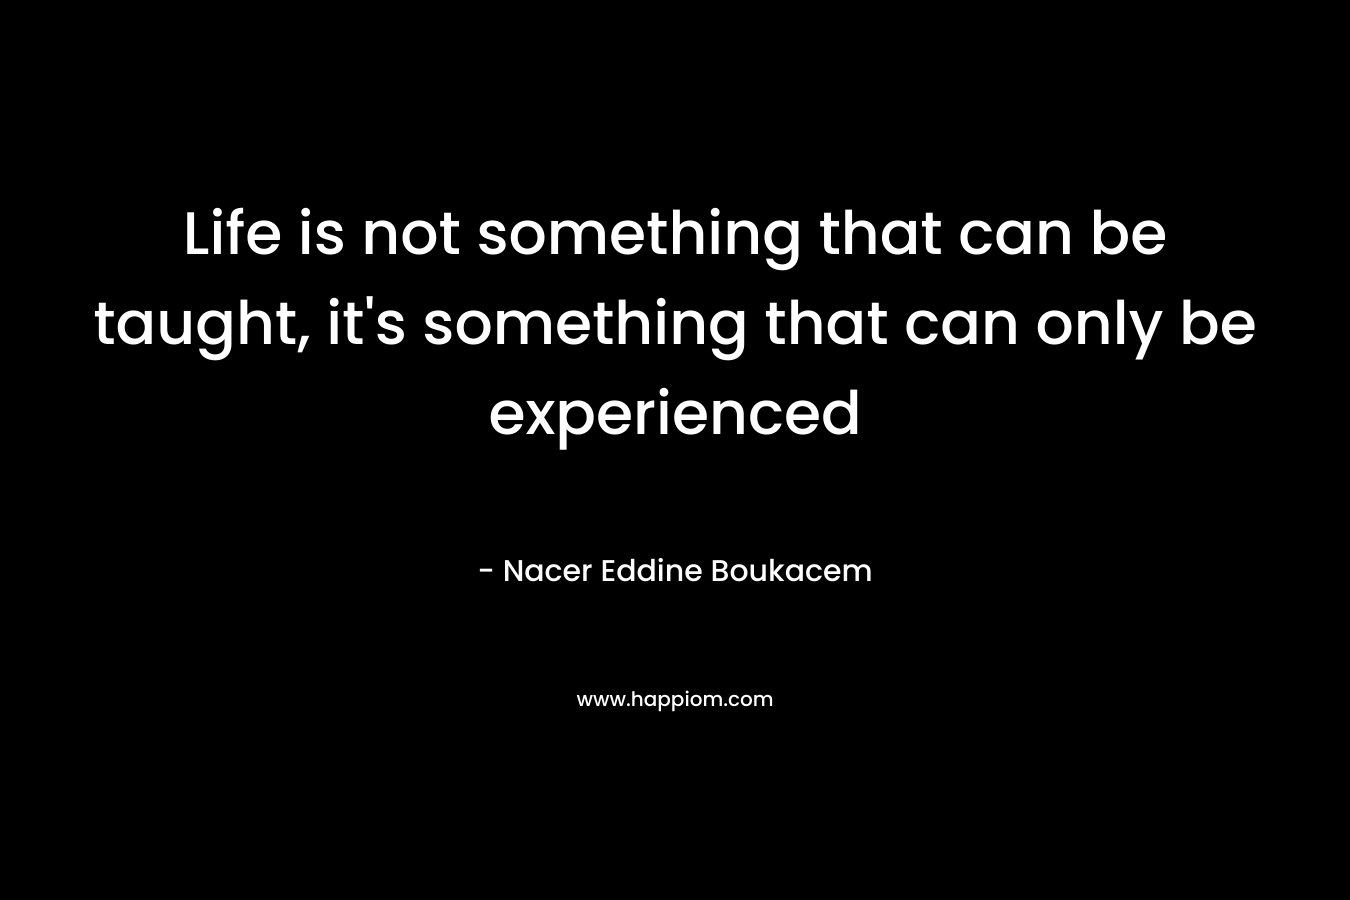 Life is not something that can be taught, it's something that can only be experienced